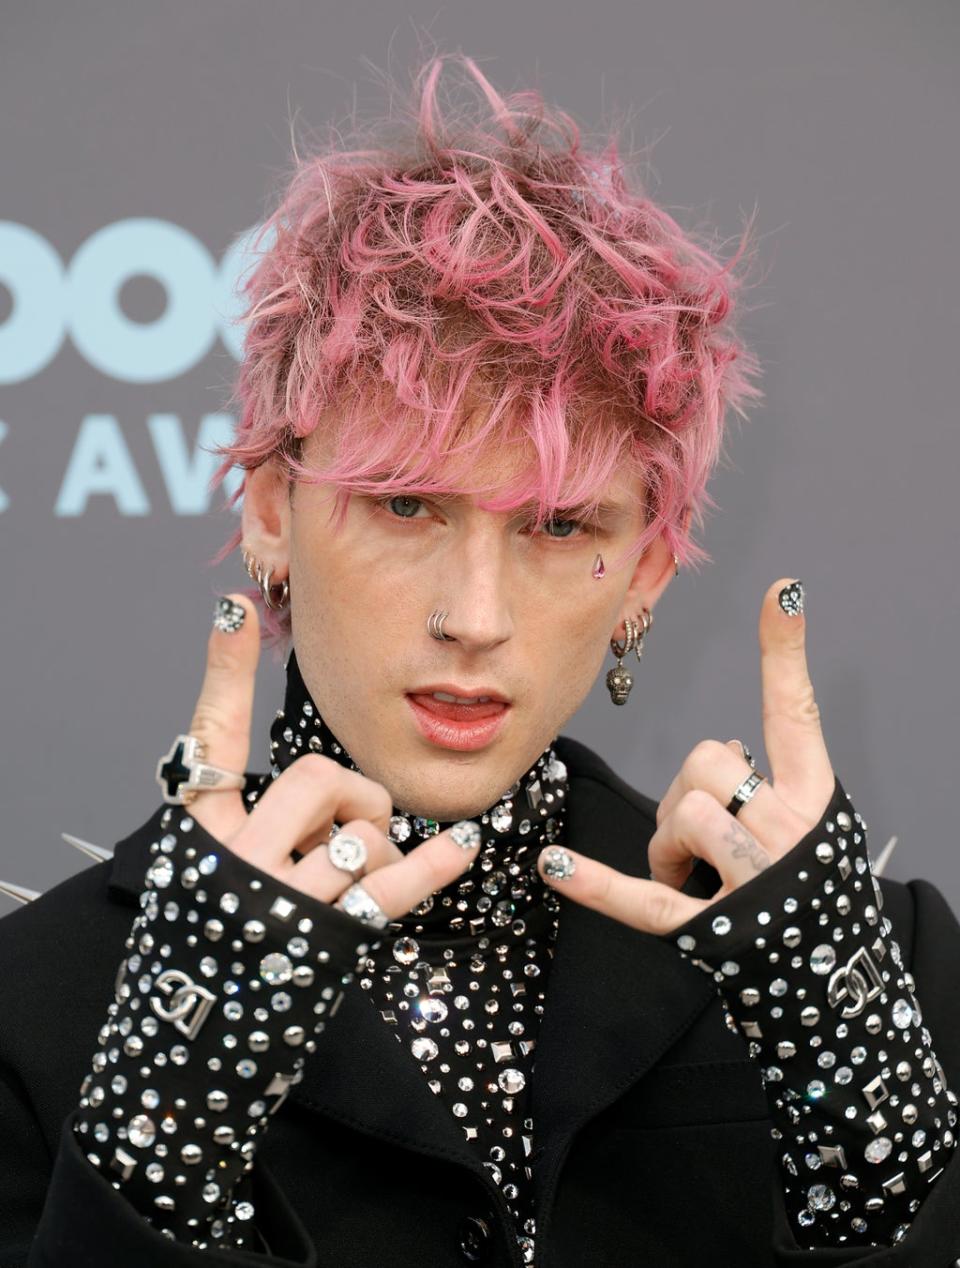 MGK wears $30,000 manicure on red carpet (Getty Images)